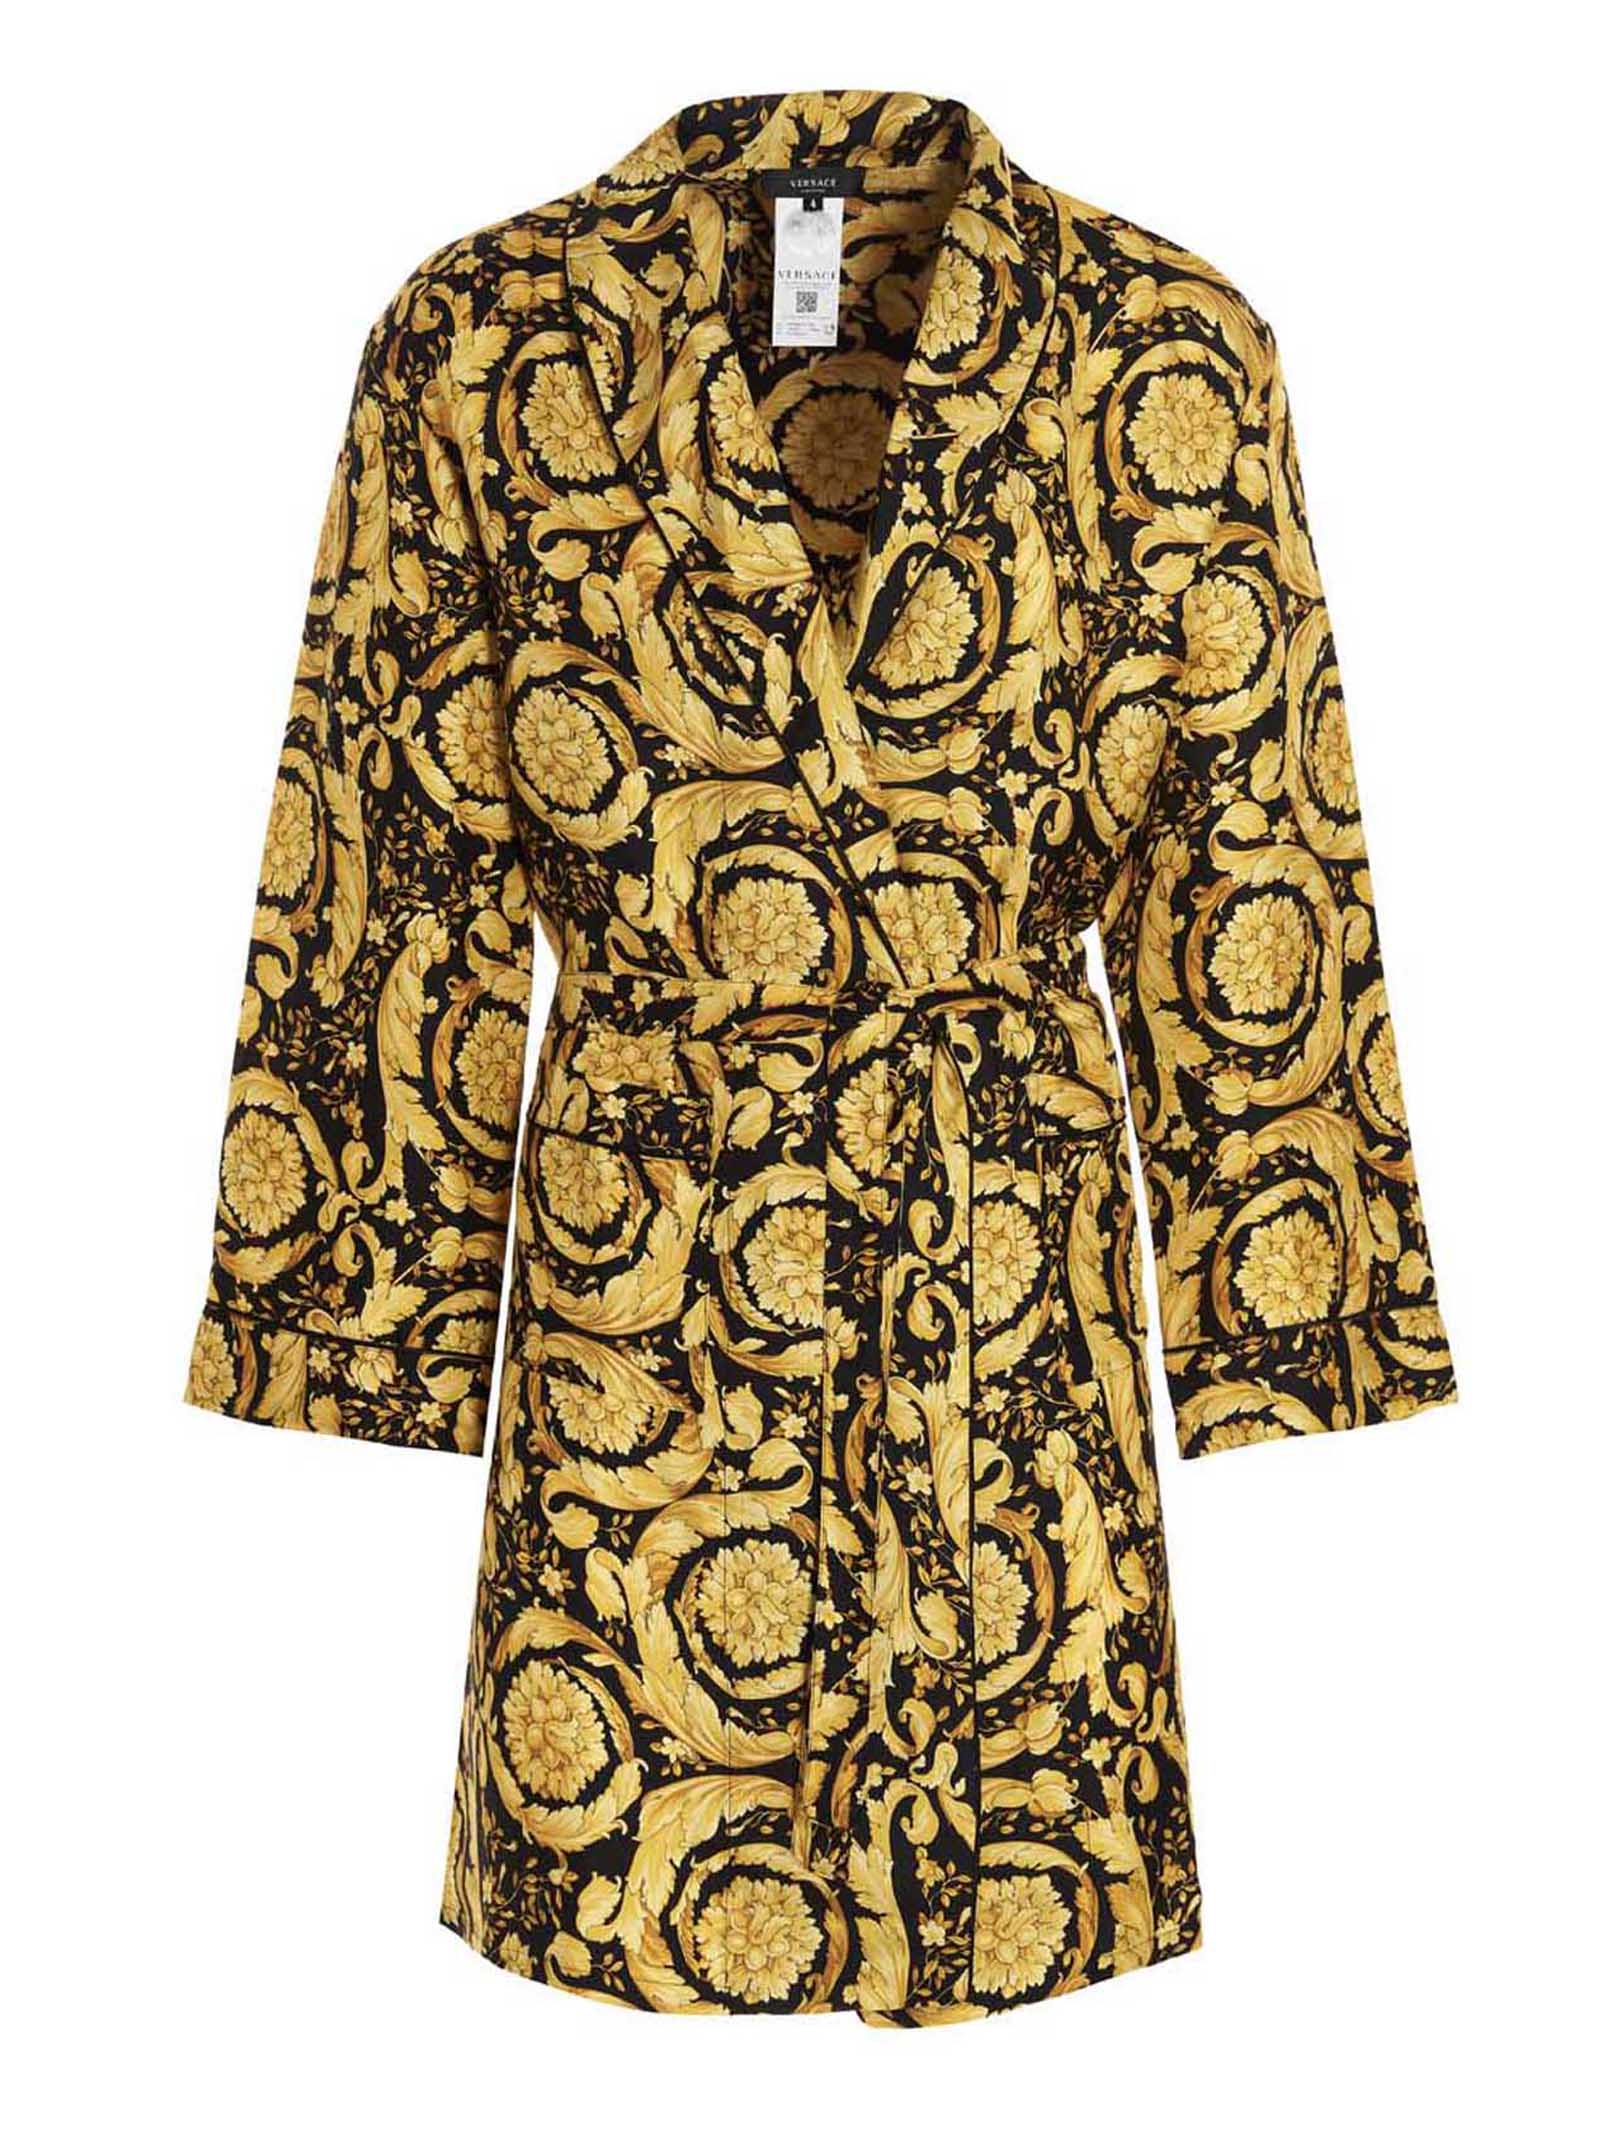 Versace barocco Dressing Gown